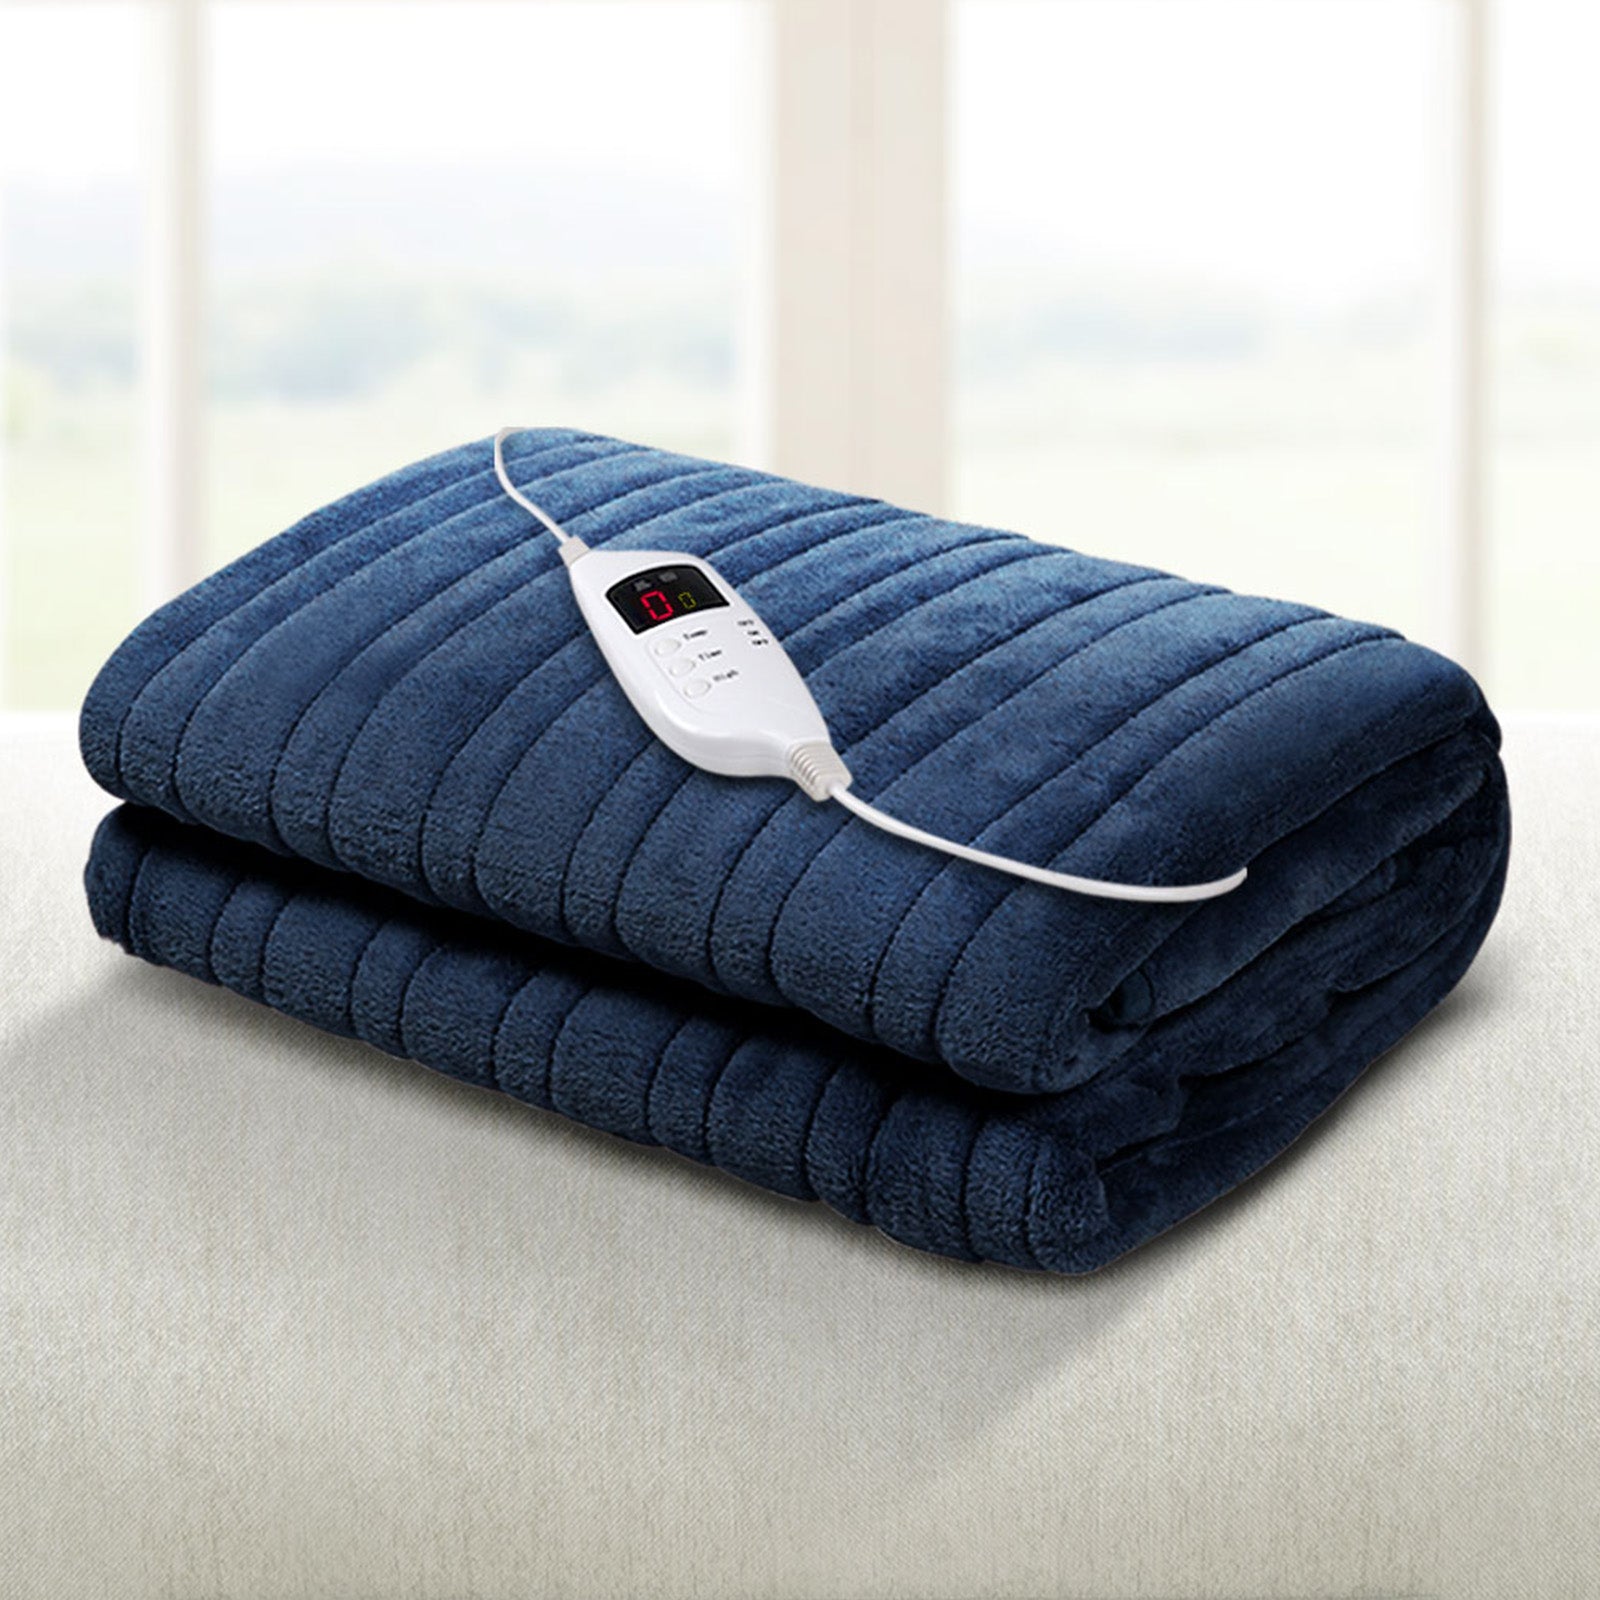 Bedding Electric Throw Blanket - Navy Fast shipping On sale